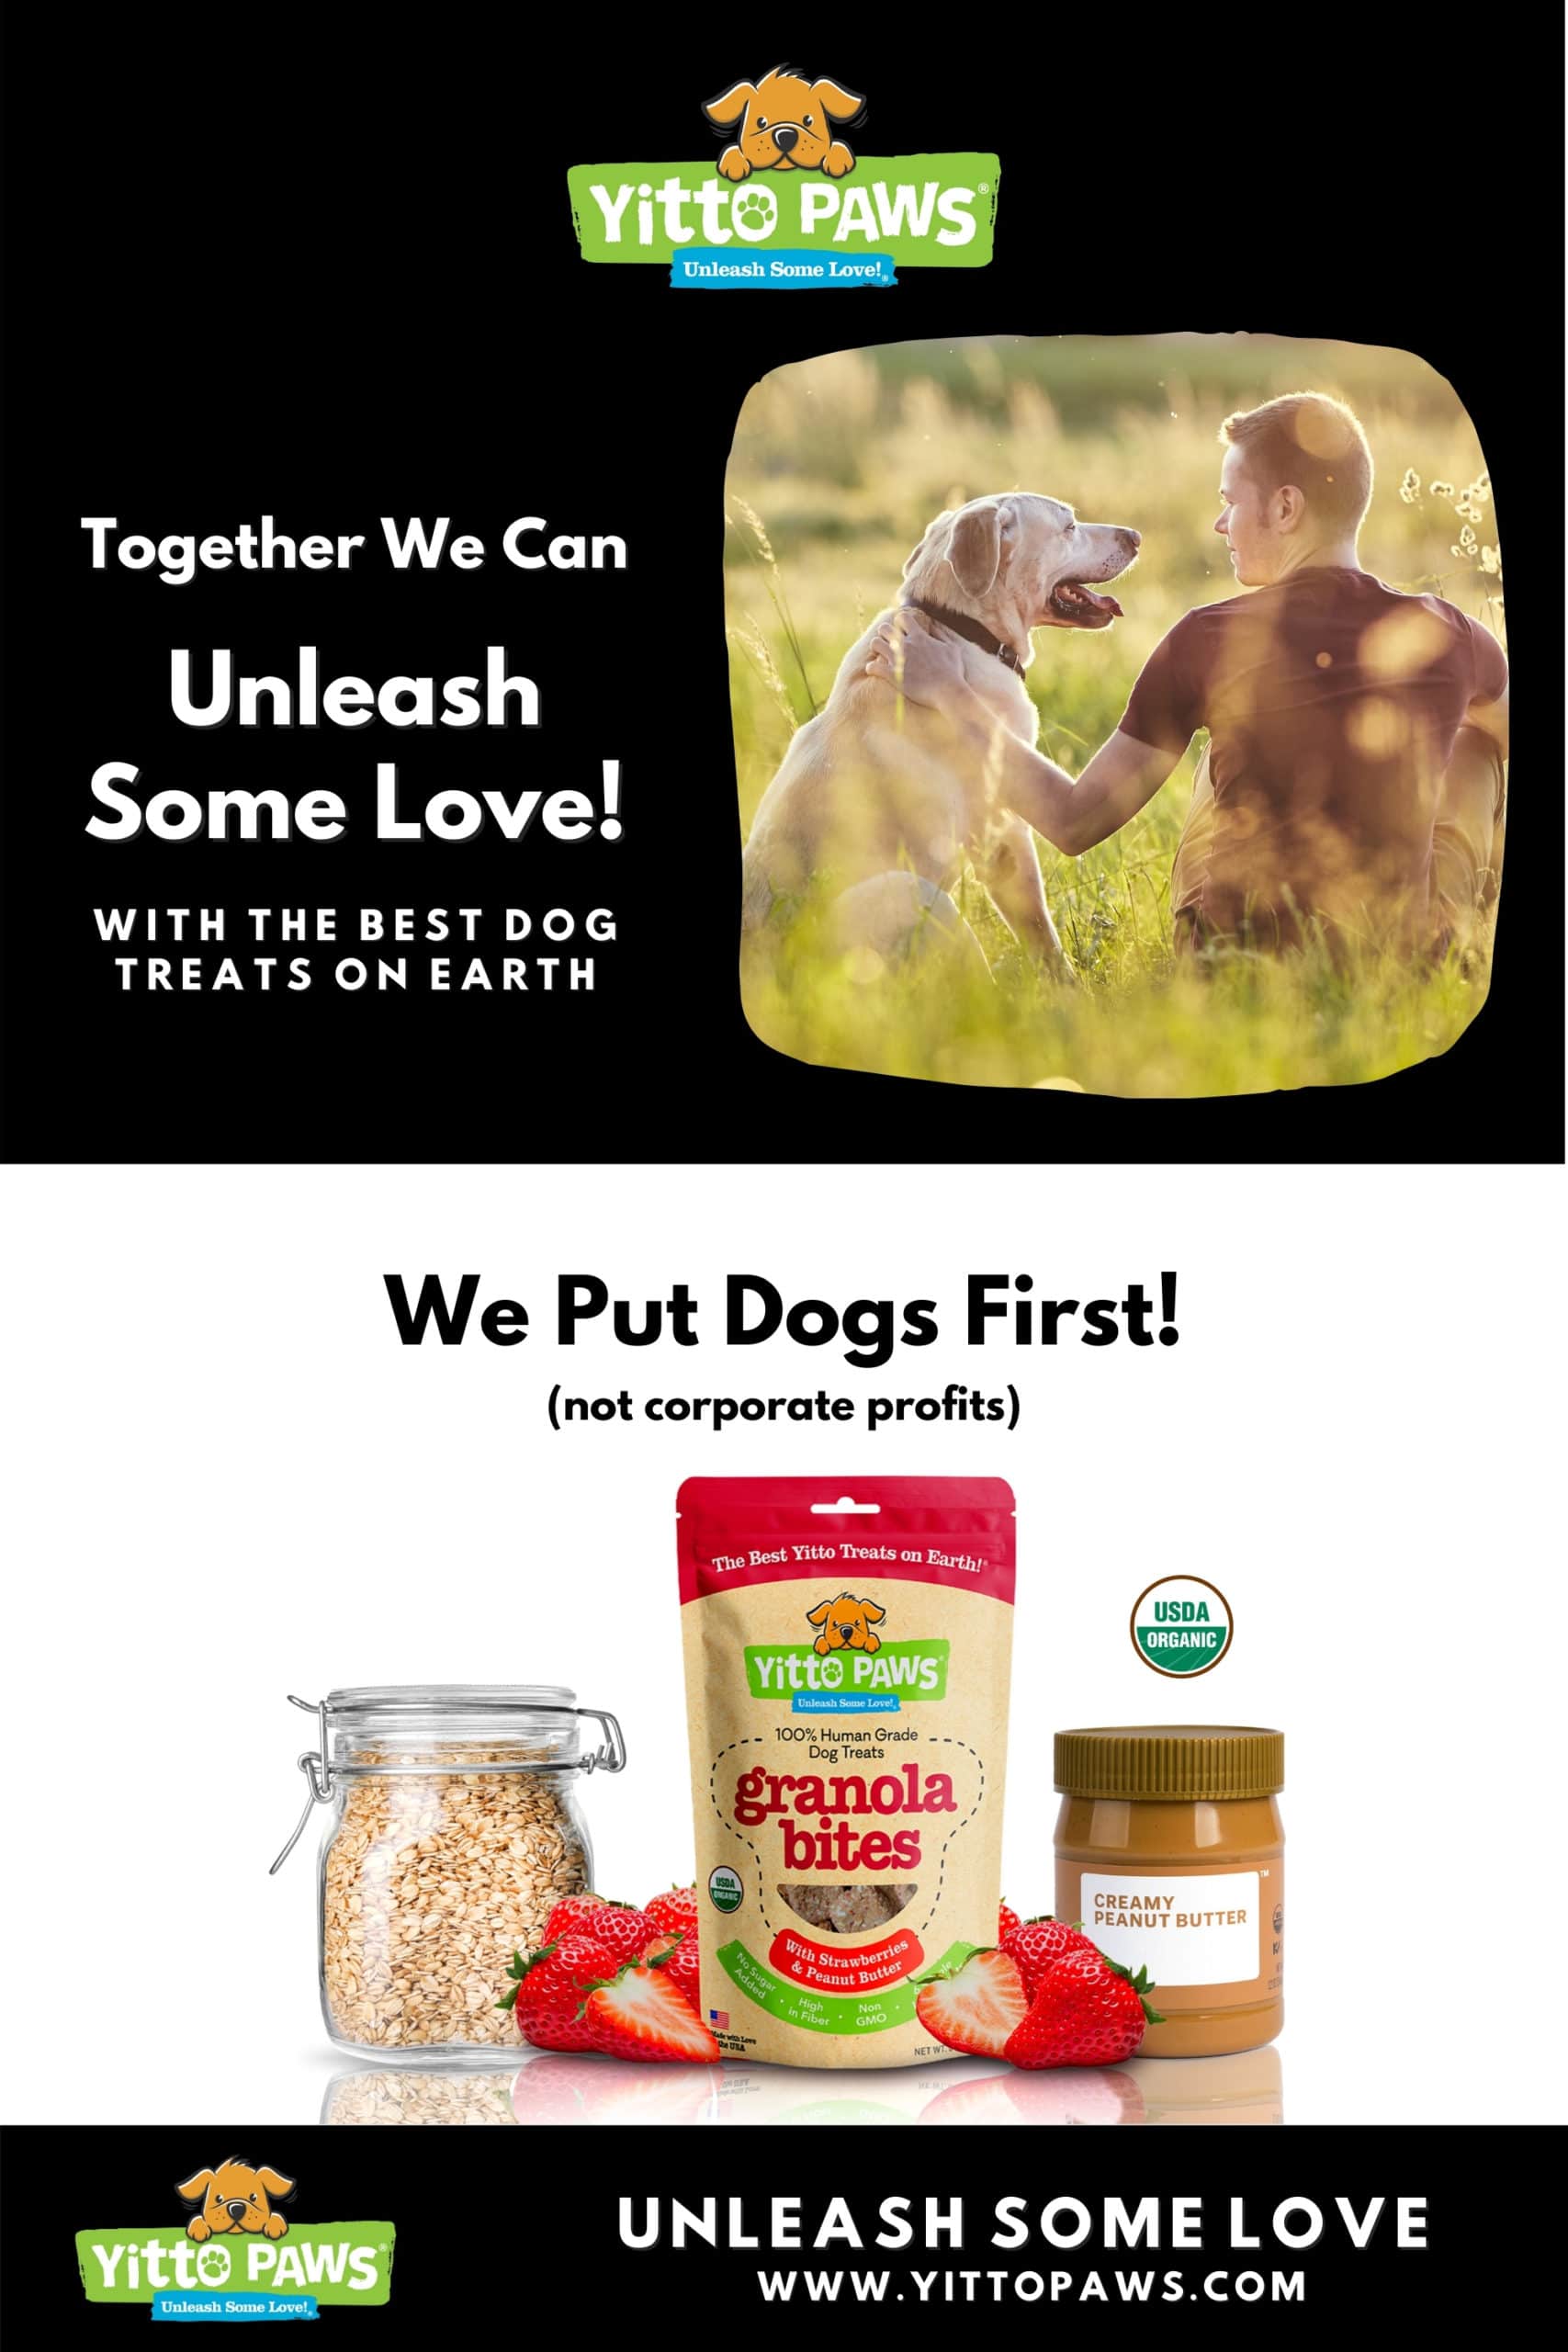 Together we can Unleash Some Love with the best dog treats on earth! Join our Mission and Let's Put Dogs First (not corporate profits).